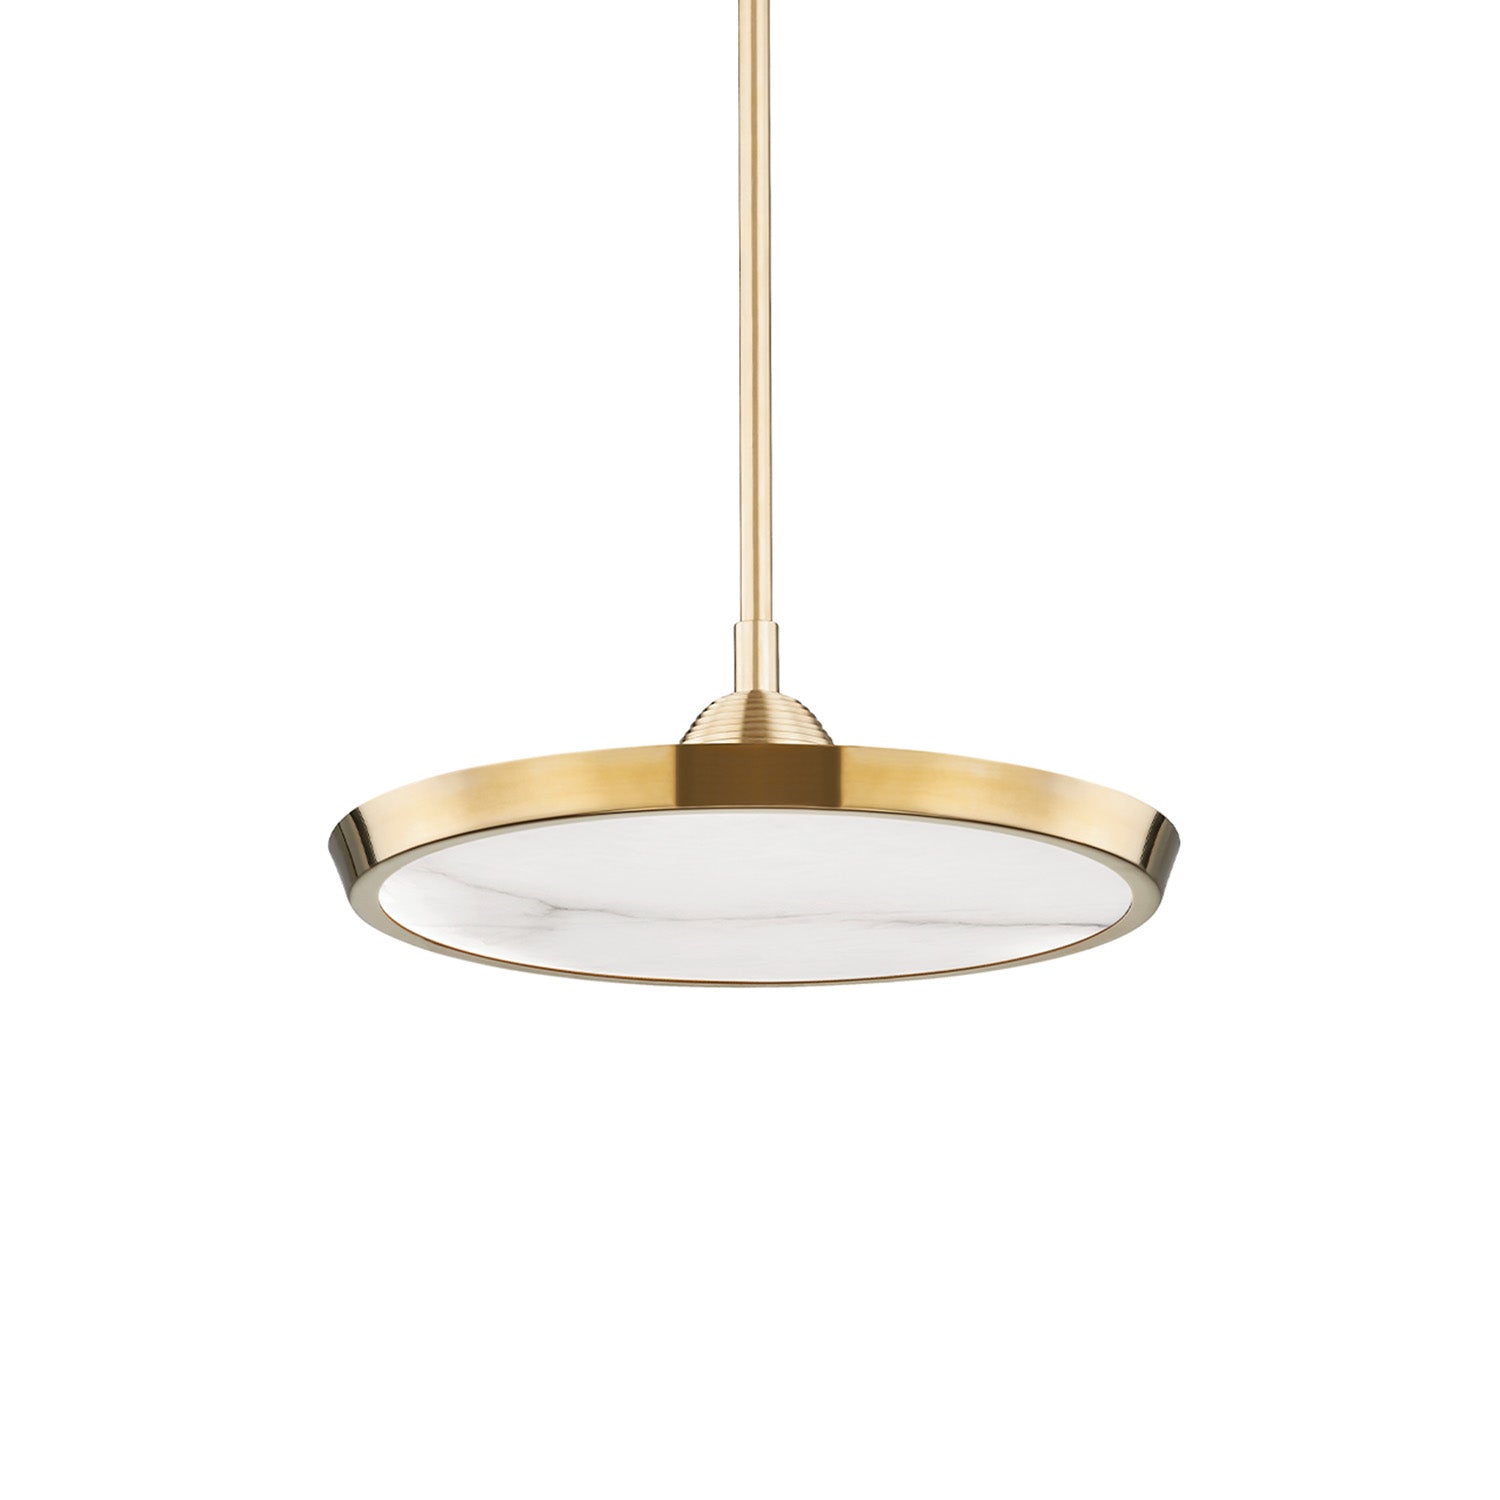 DRAPER - Art Deco Gold and Marble Circular Chandelier